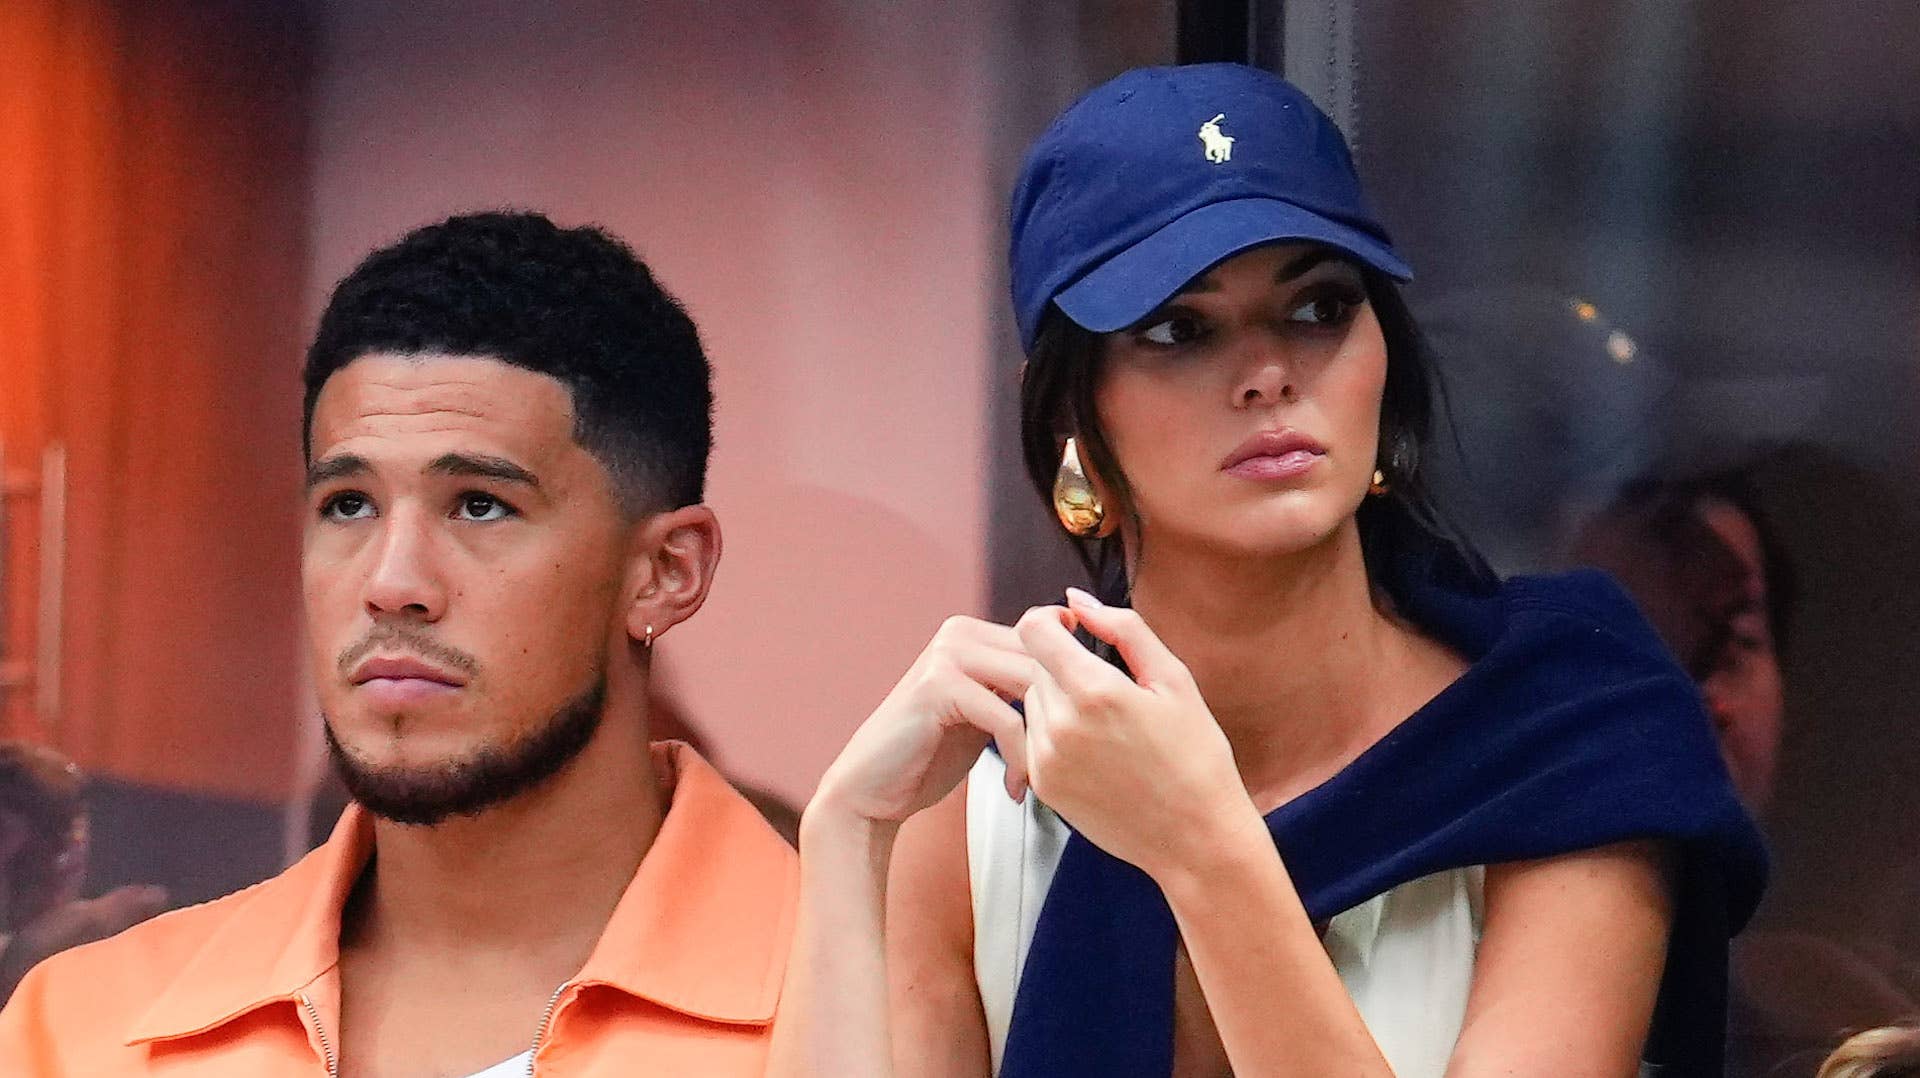 Devin Booker Spotted In Kendall Jenner’s Super Bowl Suite